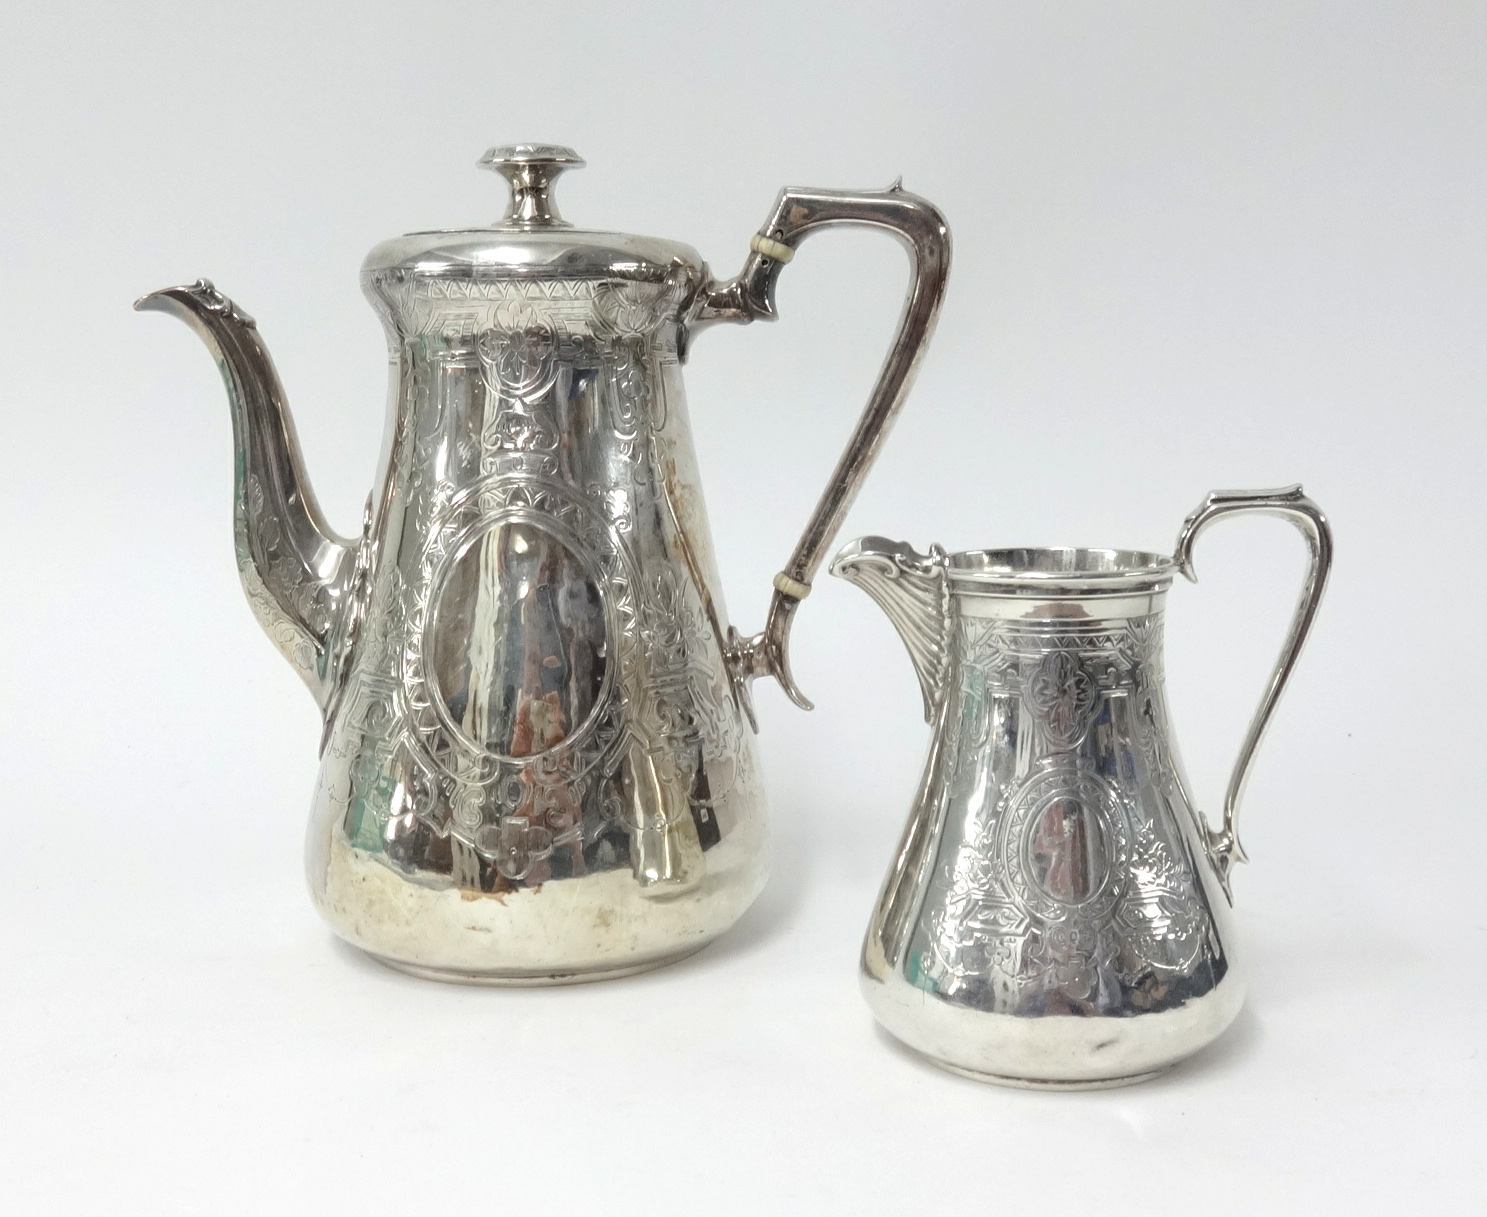 A Victorian silver coffee pot and cream jug, London circa 1863 marked 'CH' for Daniel & Charles